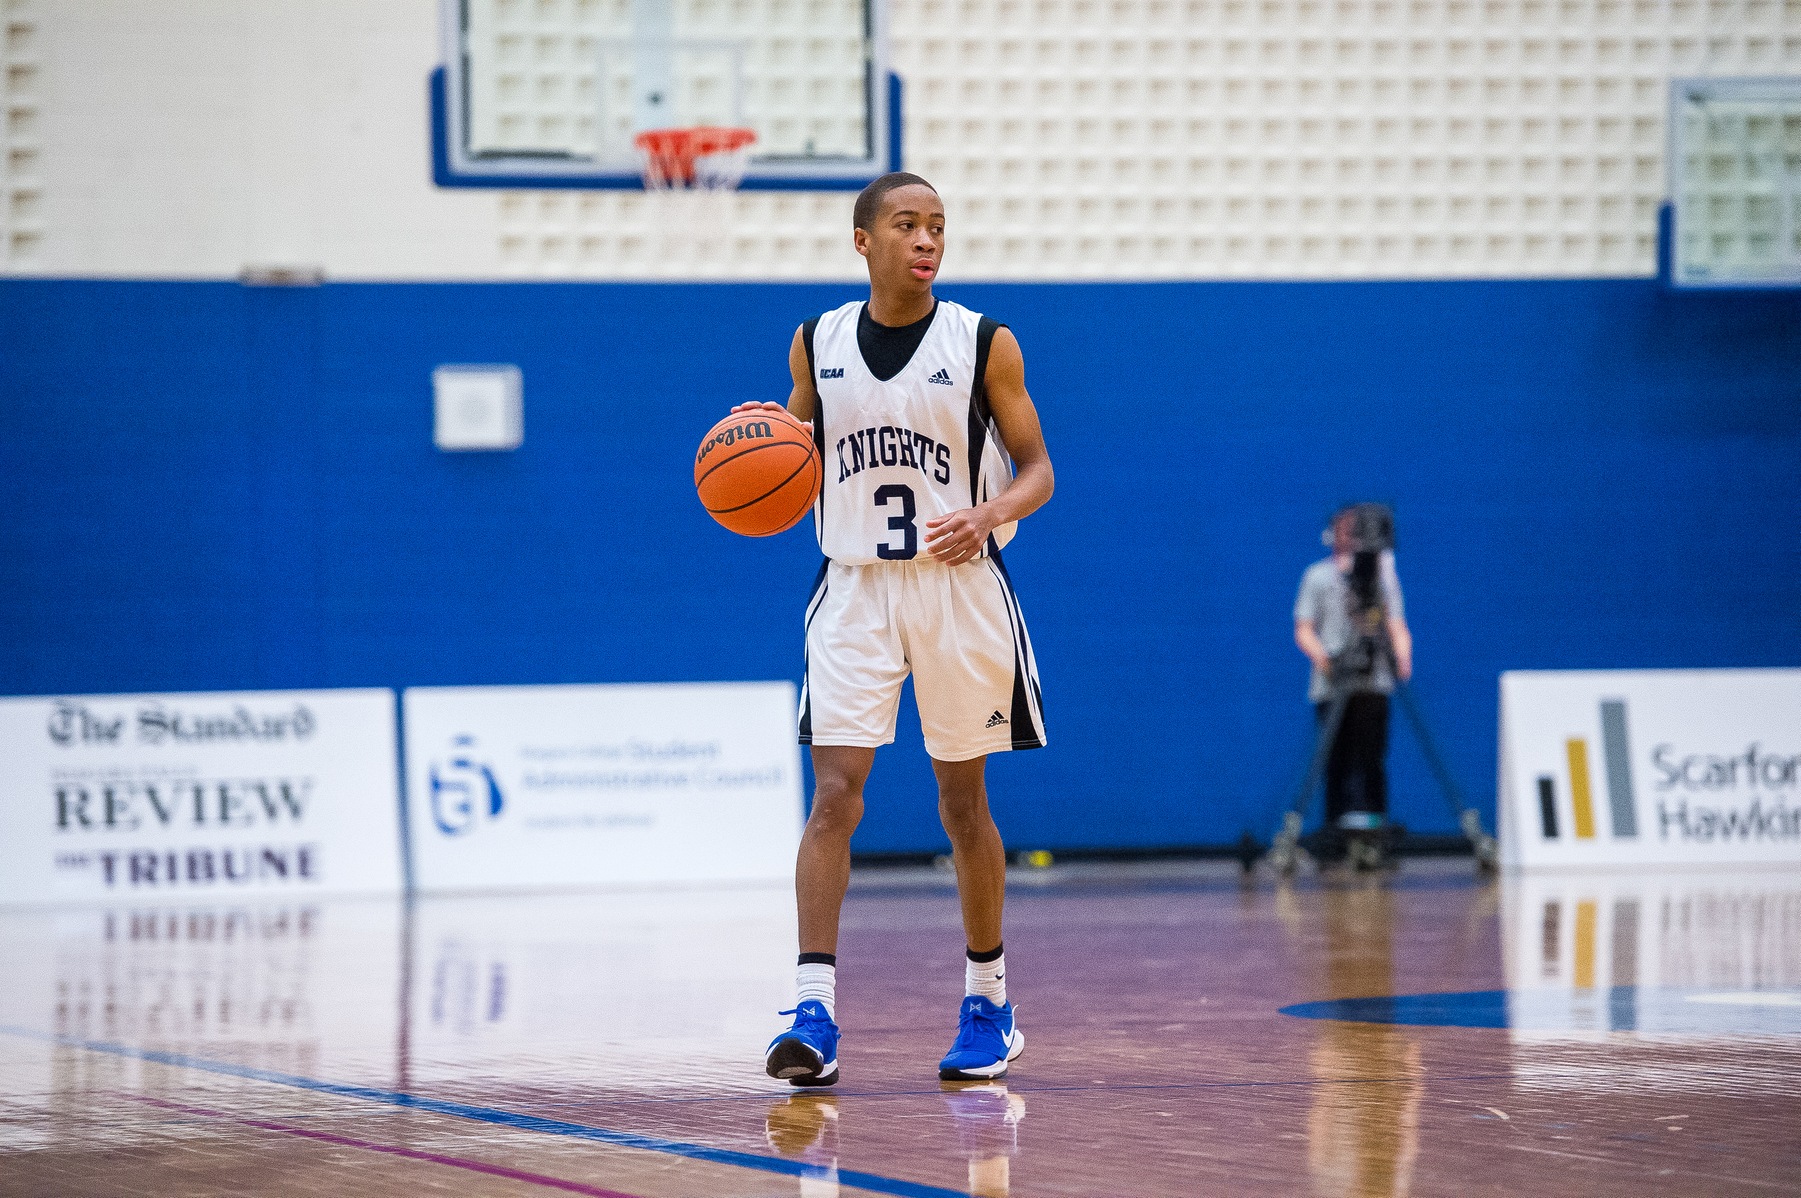 RECAP: Knights advance to consolation final with victory over Fanshawe